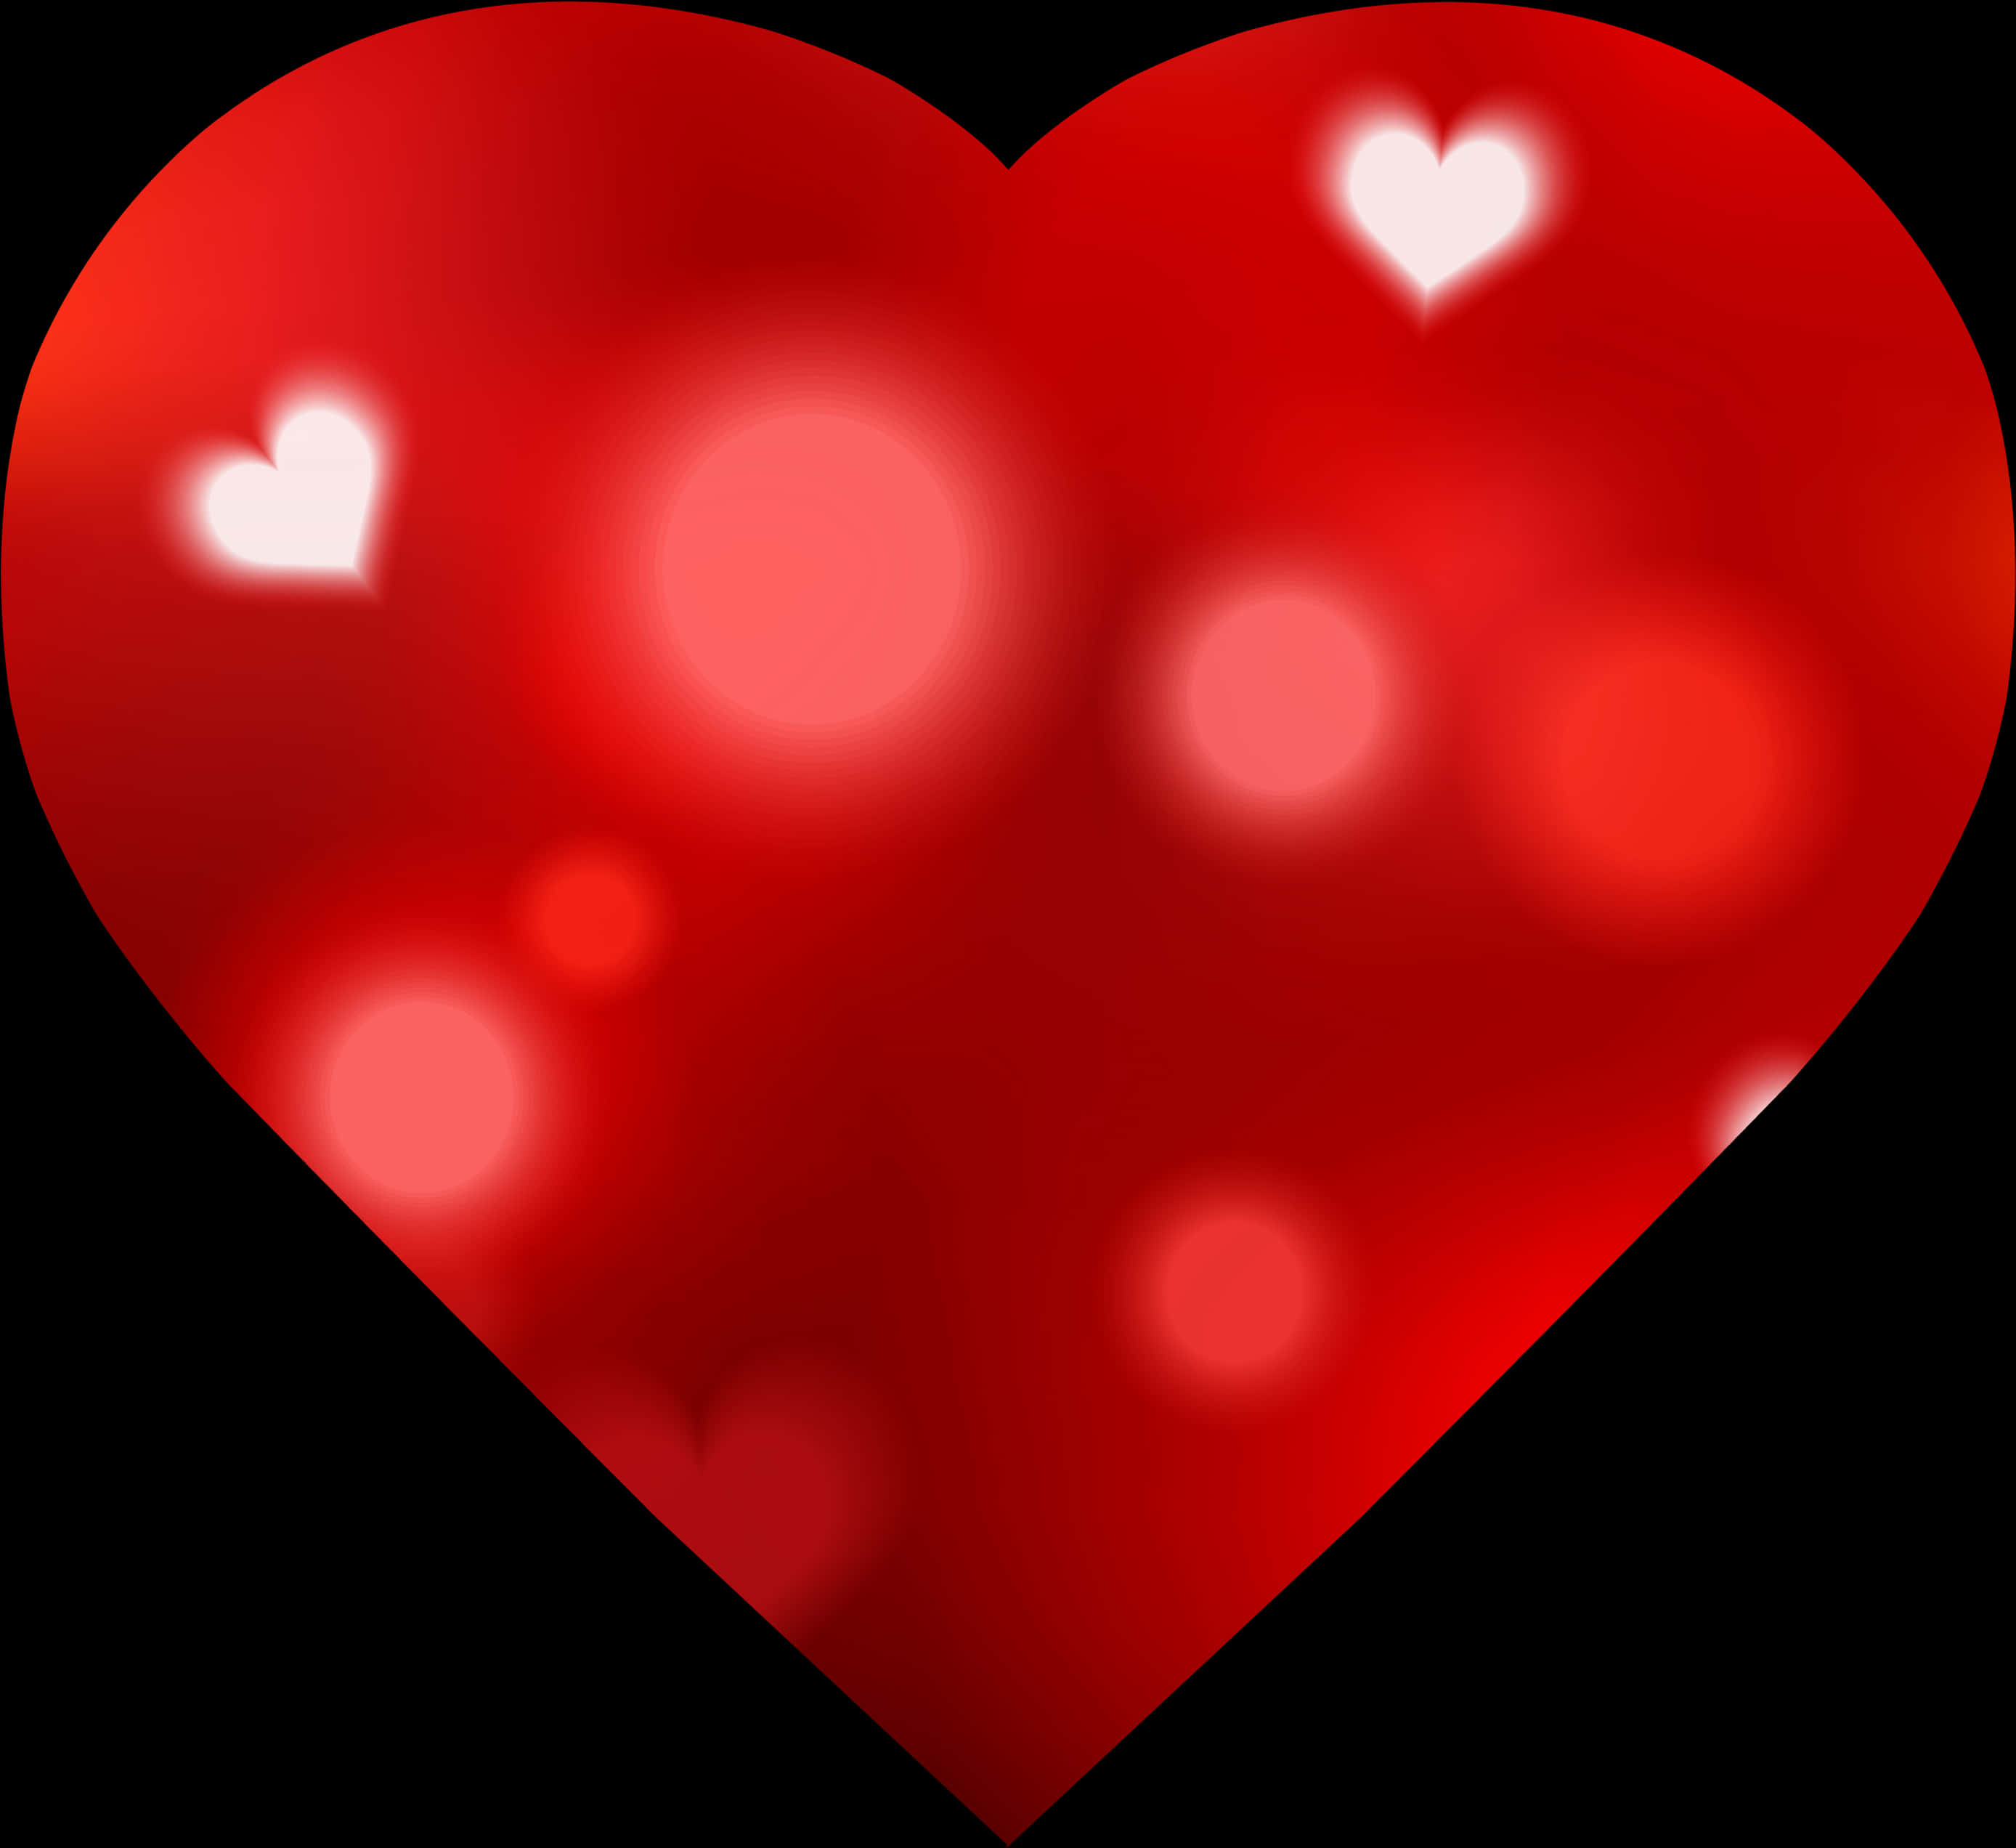 A Red Heart With White Hearts